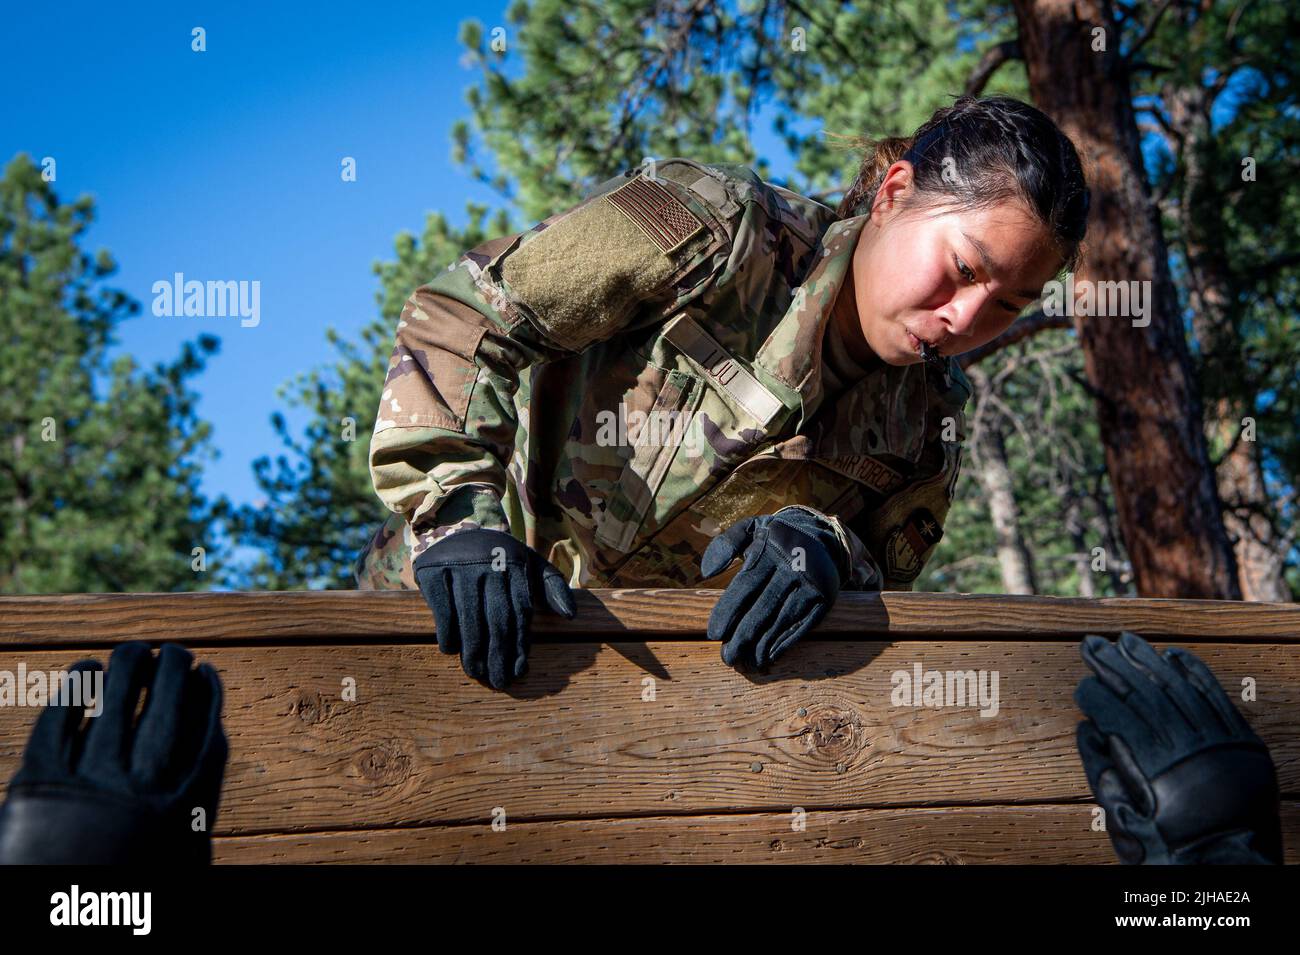 Colorado Springs, Colorado, USA. 12th July, 2022. Basic Cadets from the Class of 2026 complete the obstacle course at the U.S. Air Force Academy's Jacks Valley in Colorado Springs, Colo., on July 12, 2022. Basic Cadet Training (BCT) is a six-week indoctrination program to guide the transformation of new cadets from being civilians to military academy cadets prepared to enter a four-year officer commissioning program. Credit: U.S. Air Force/ZUMA Press Wire Service/ZUMAPRESS.com/Alamy Live News Stock Photo